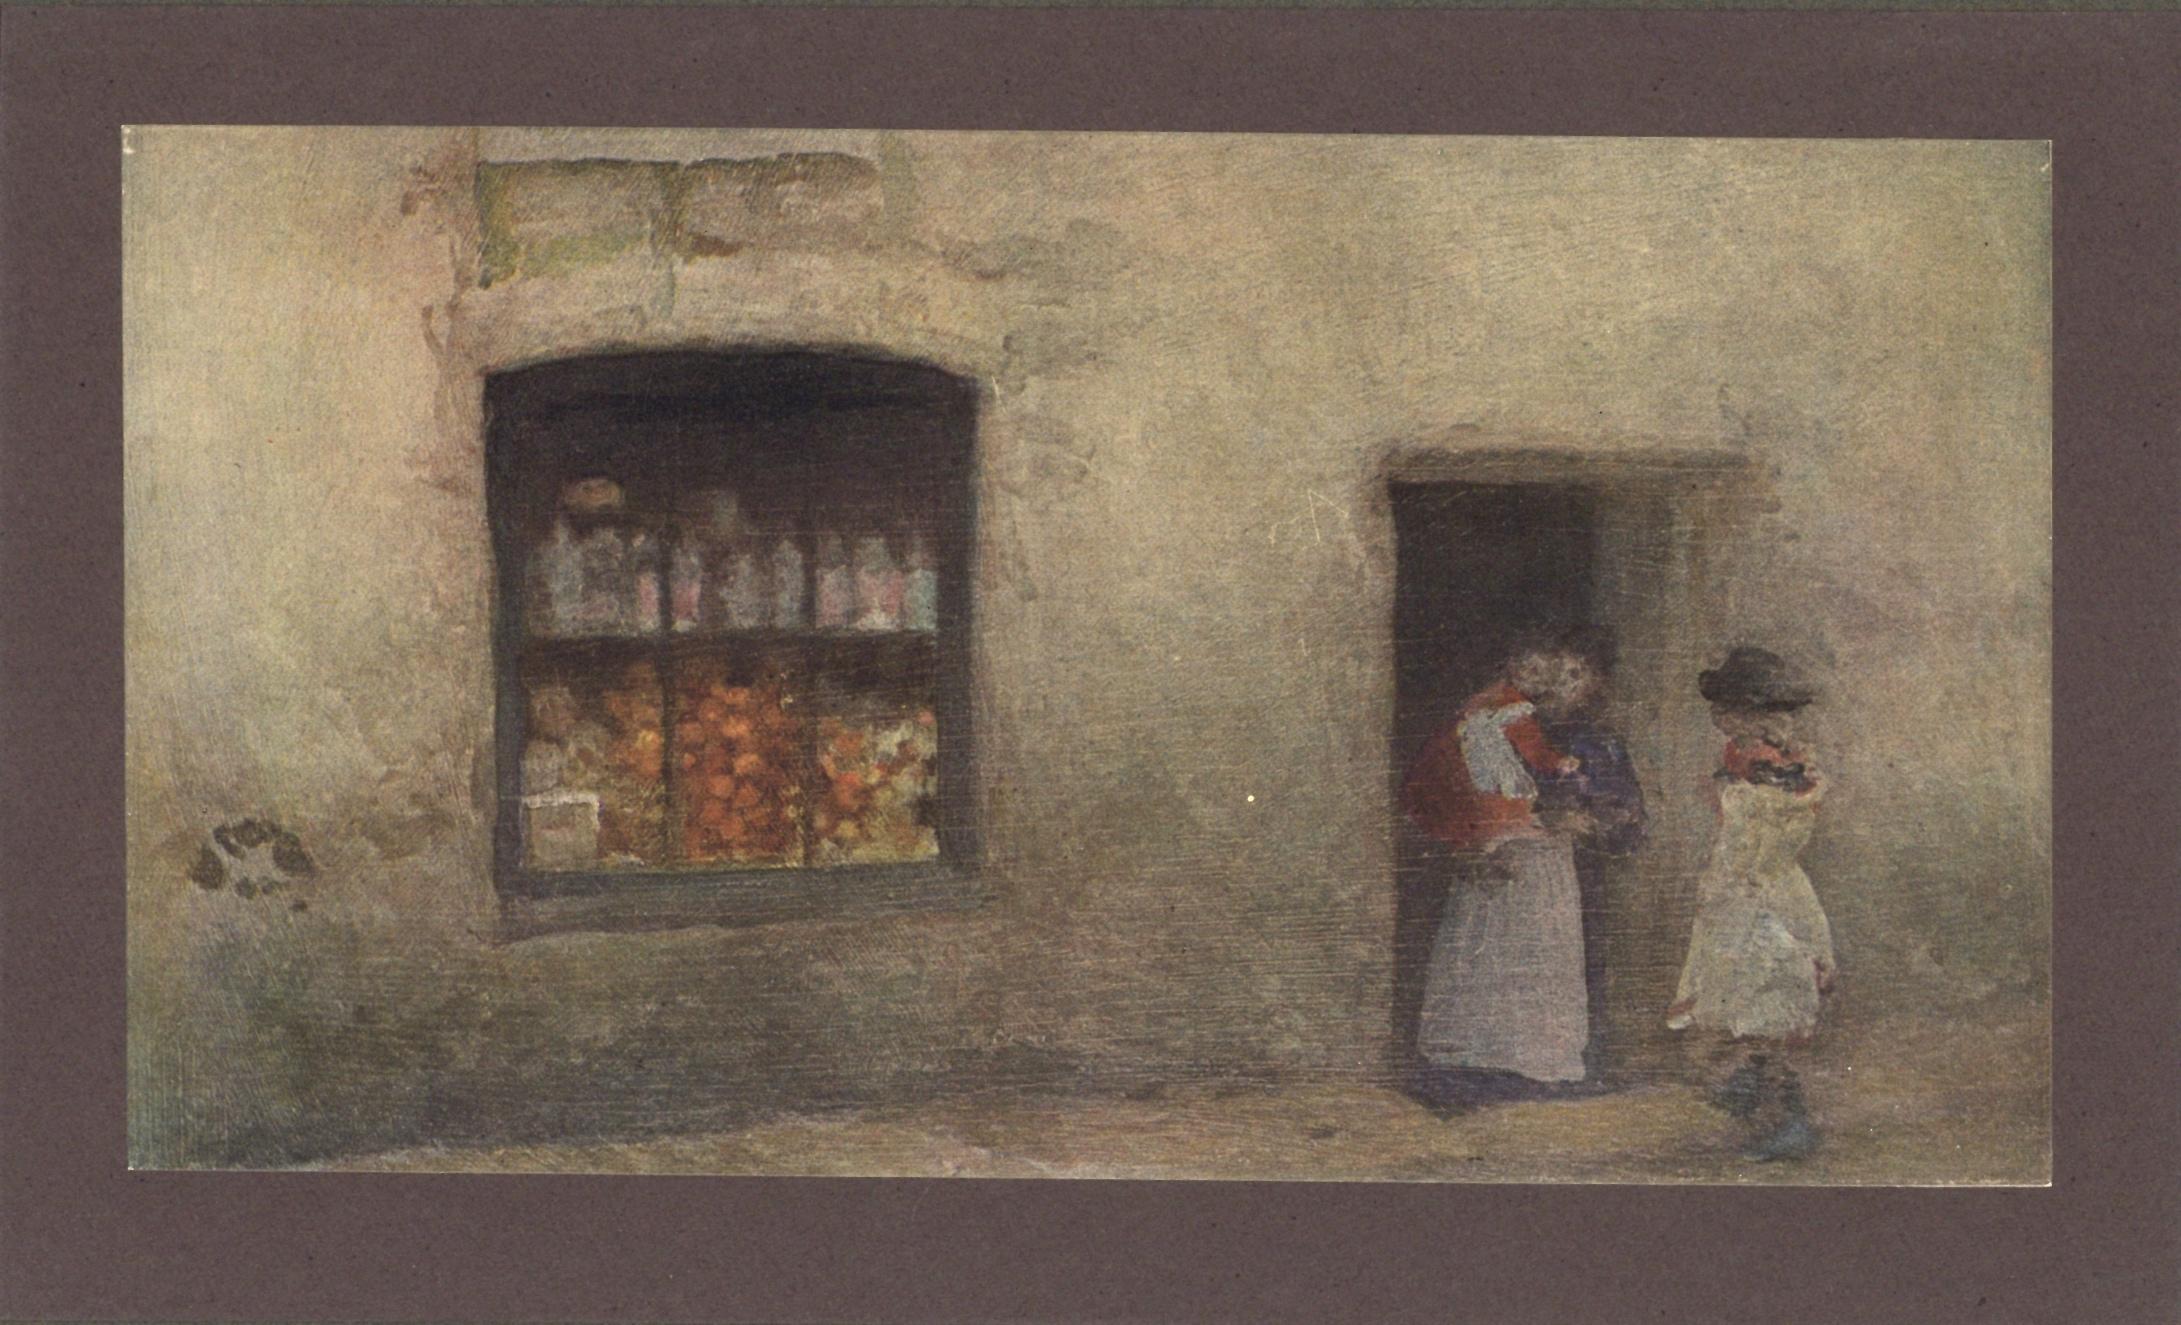 "The Sweet Shop" printed in 1905 - Print by (after) James Abbott McNeill Whistler